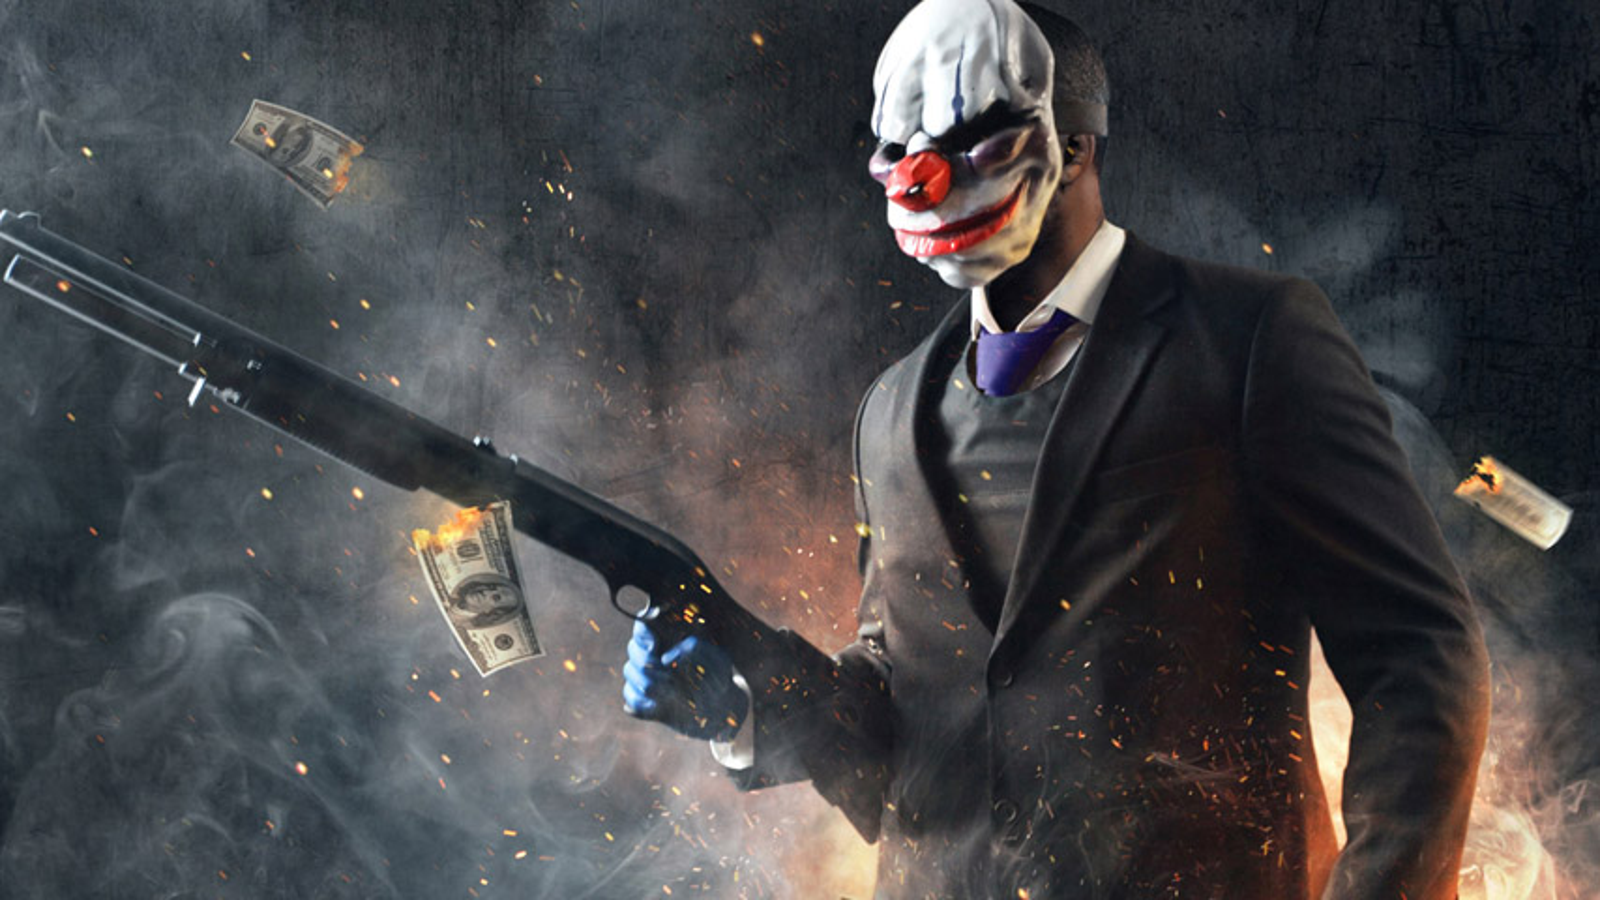 PAYDAY 2: Legacy Collection - Epic Games Store